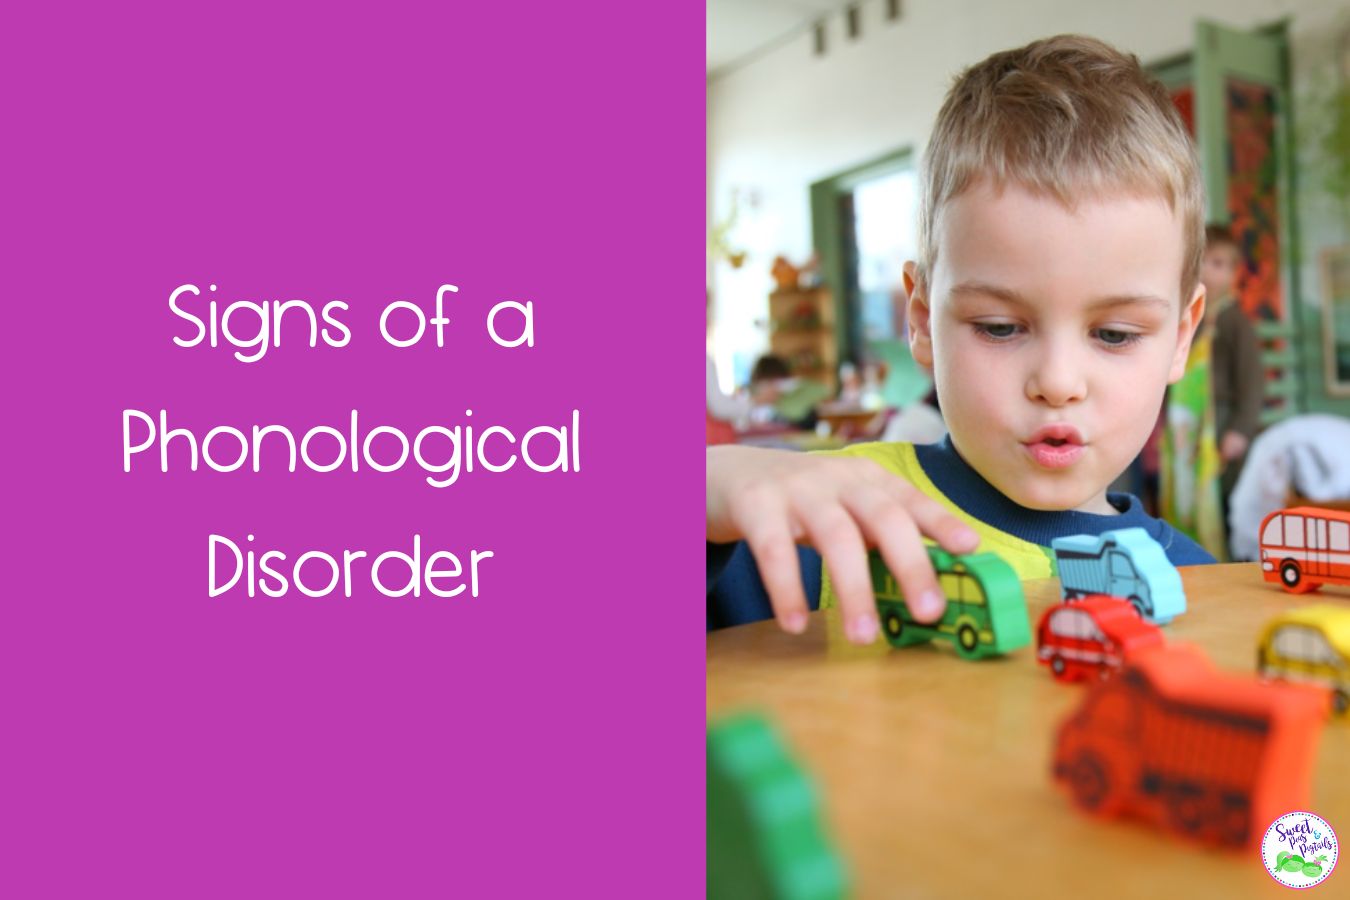 Signs of a Phonological Disorder